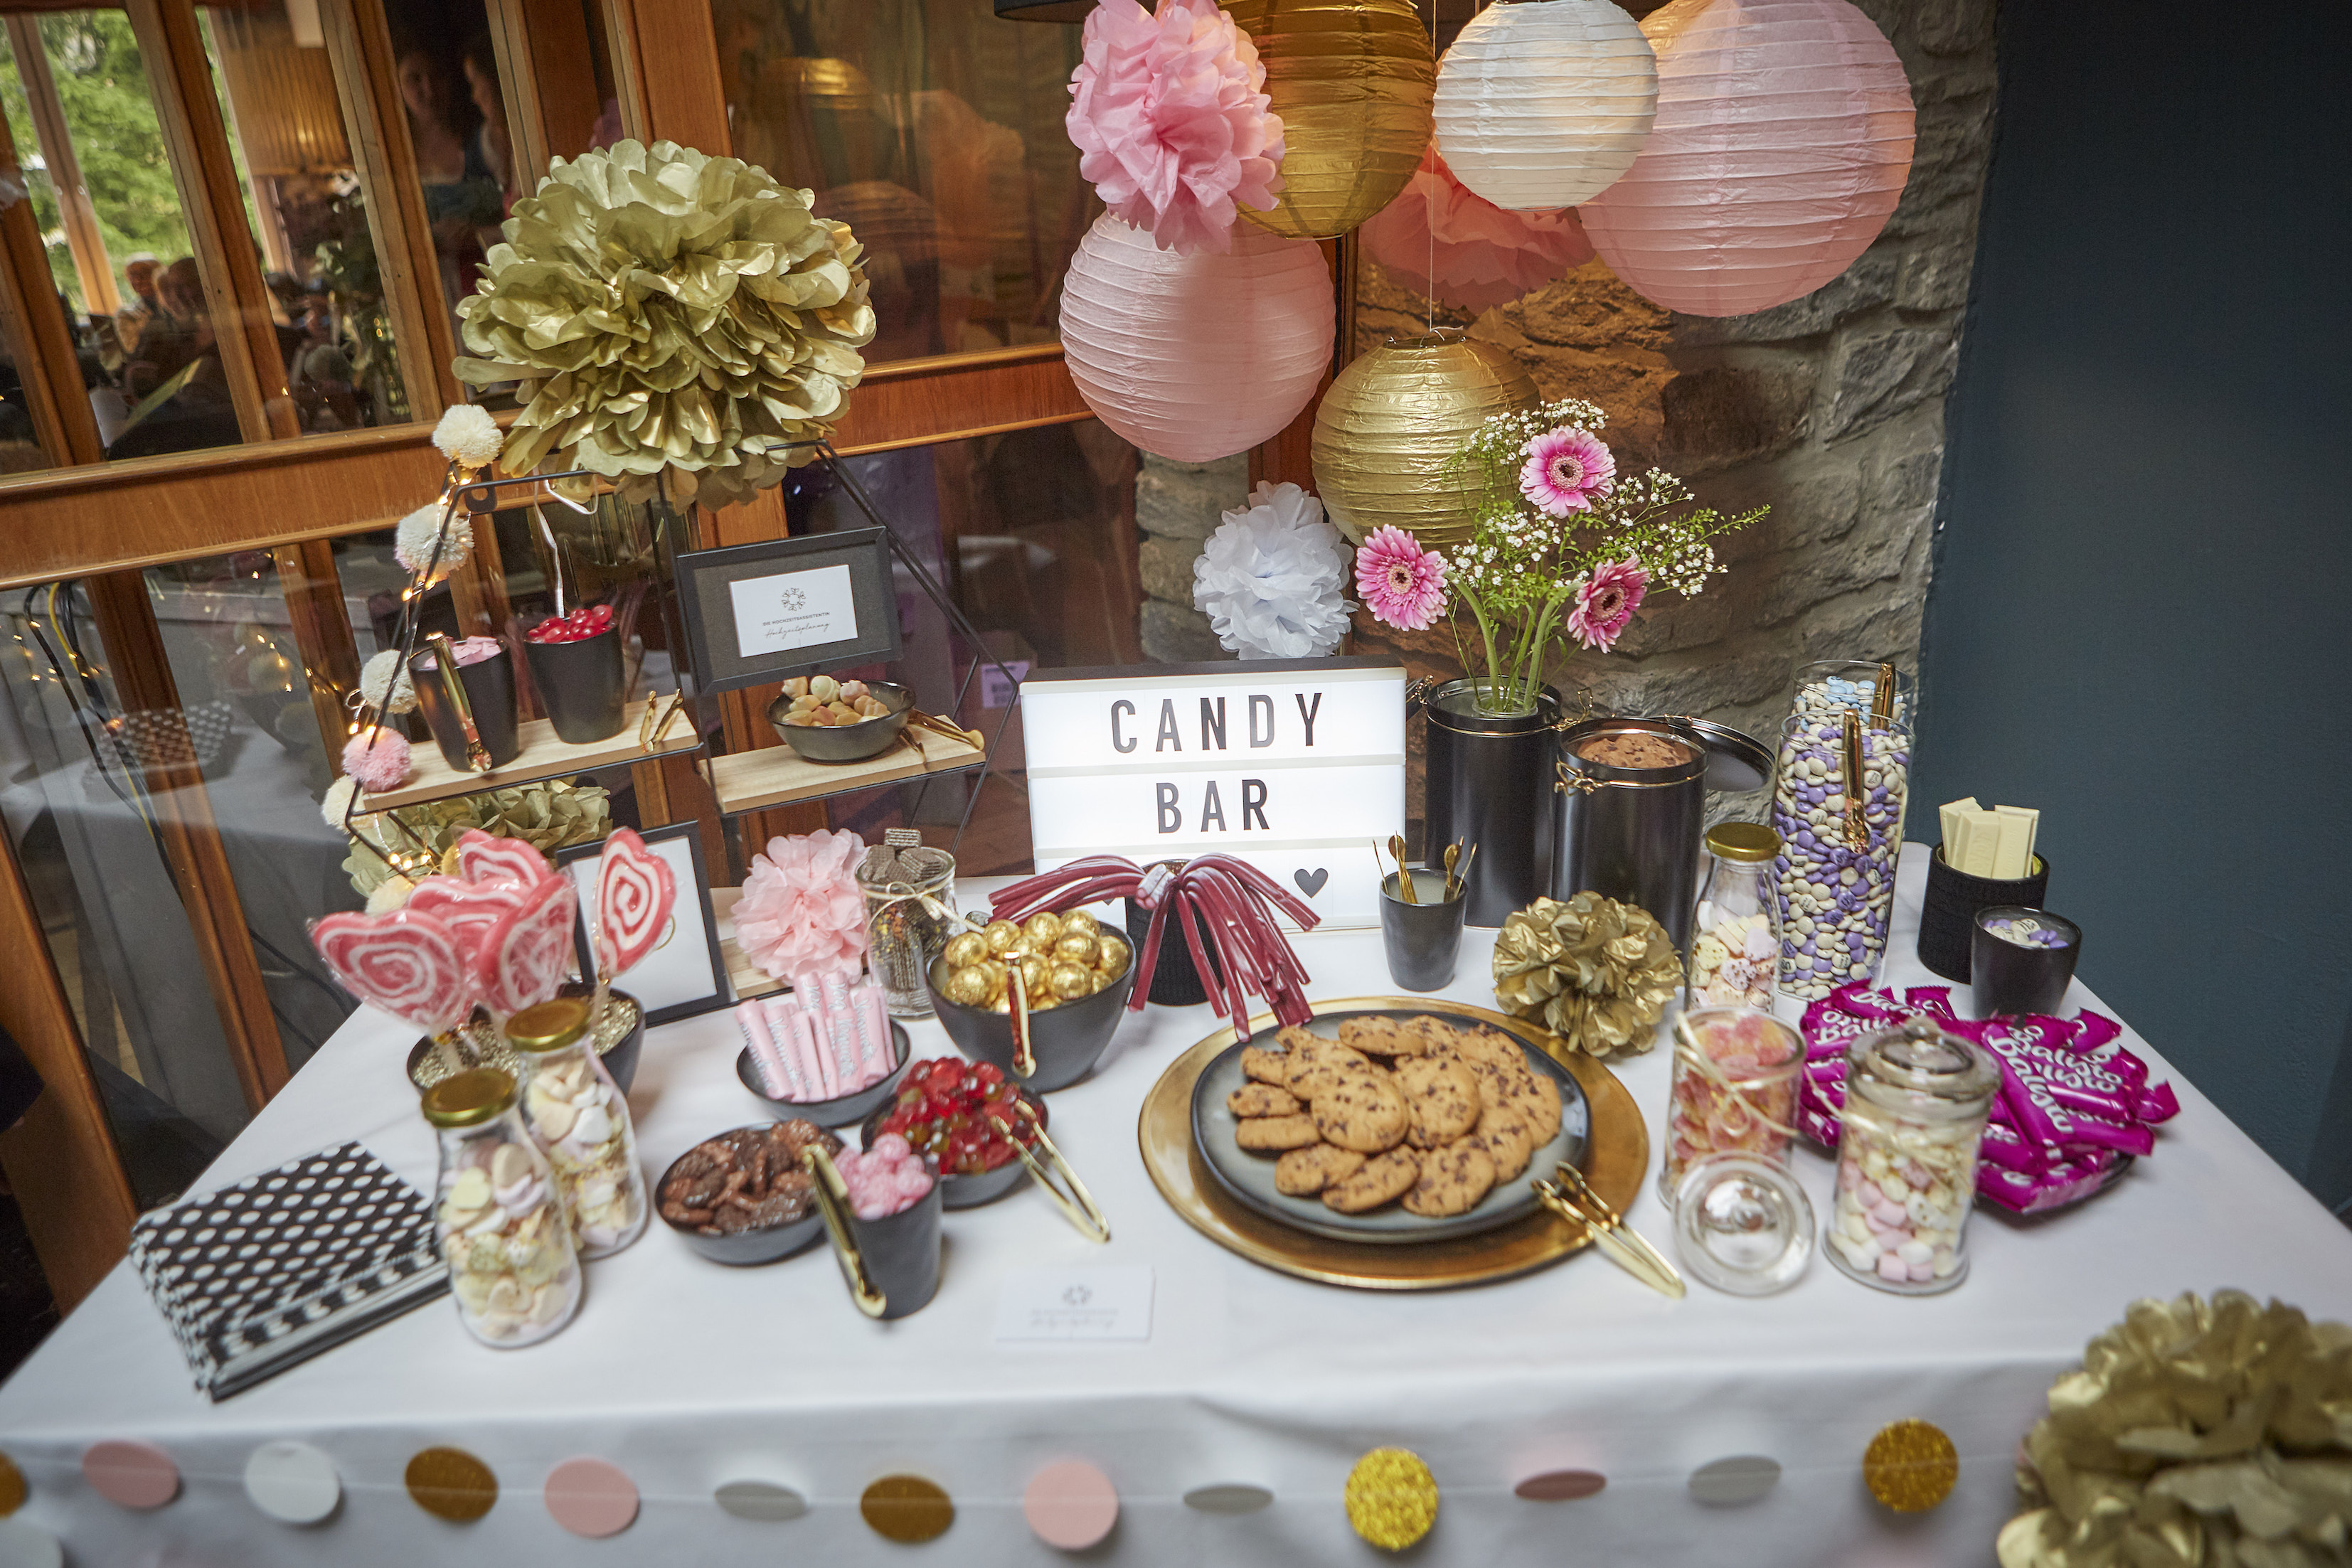 Candybar – by the wedding assistant